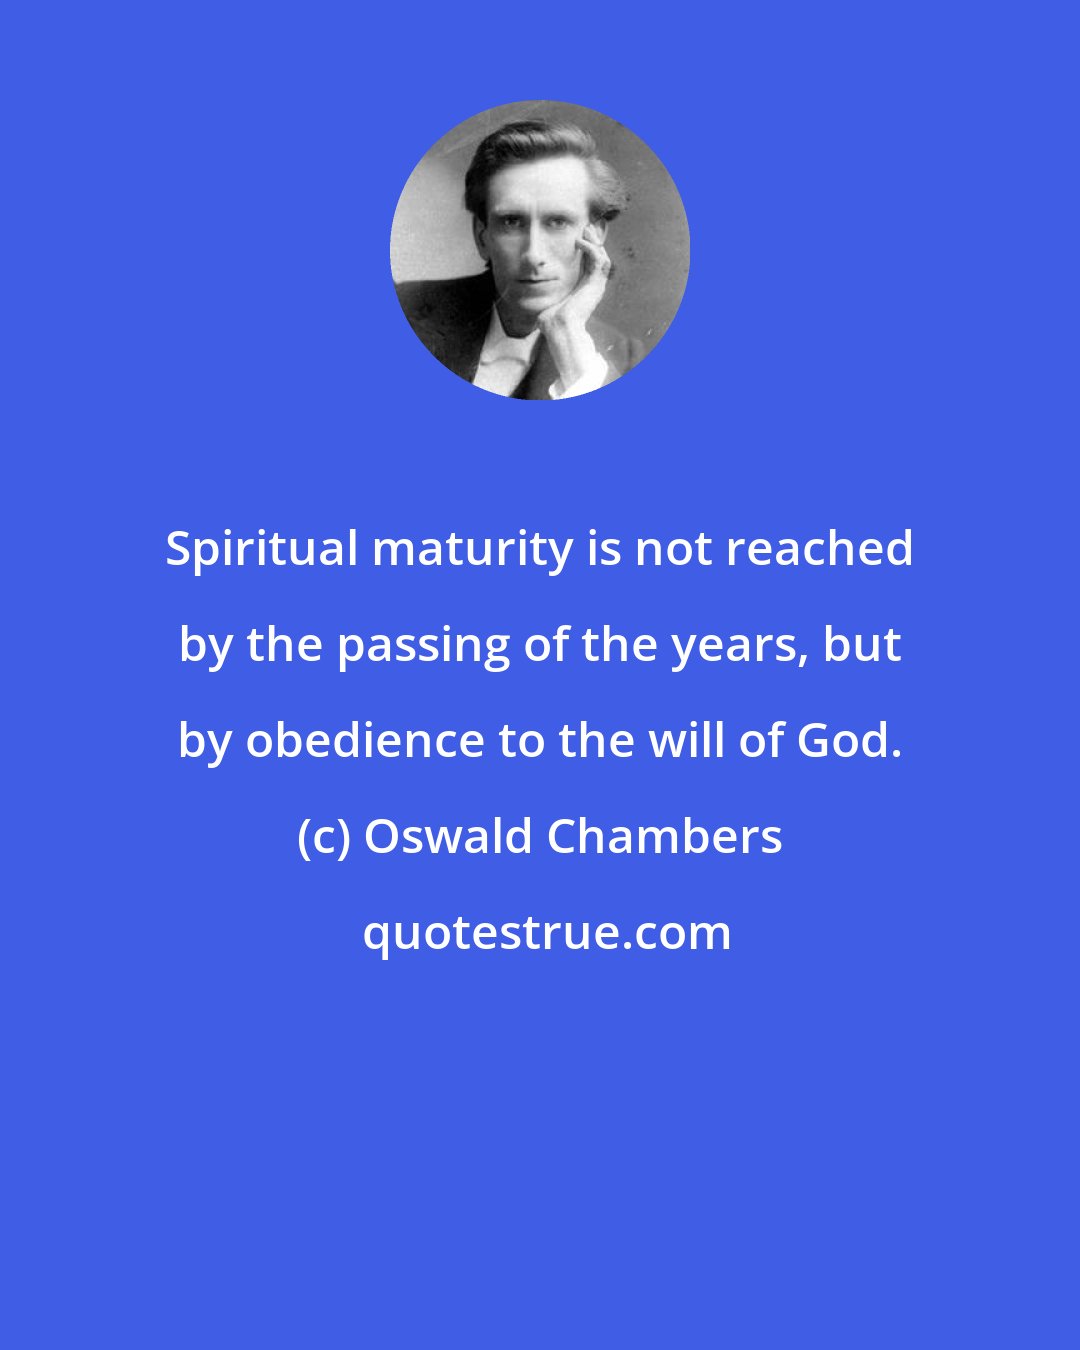 Oswald Chambers: Spiritual maturity is not reached by the passing of the years, but by obedience to the will of God.